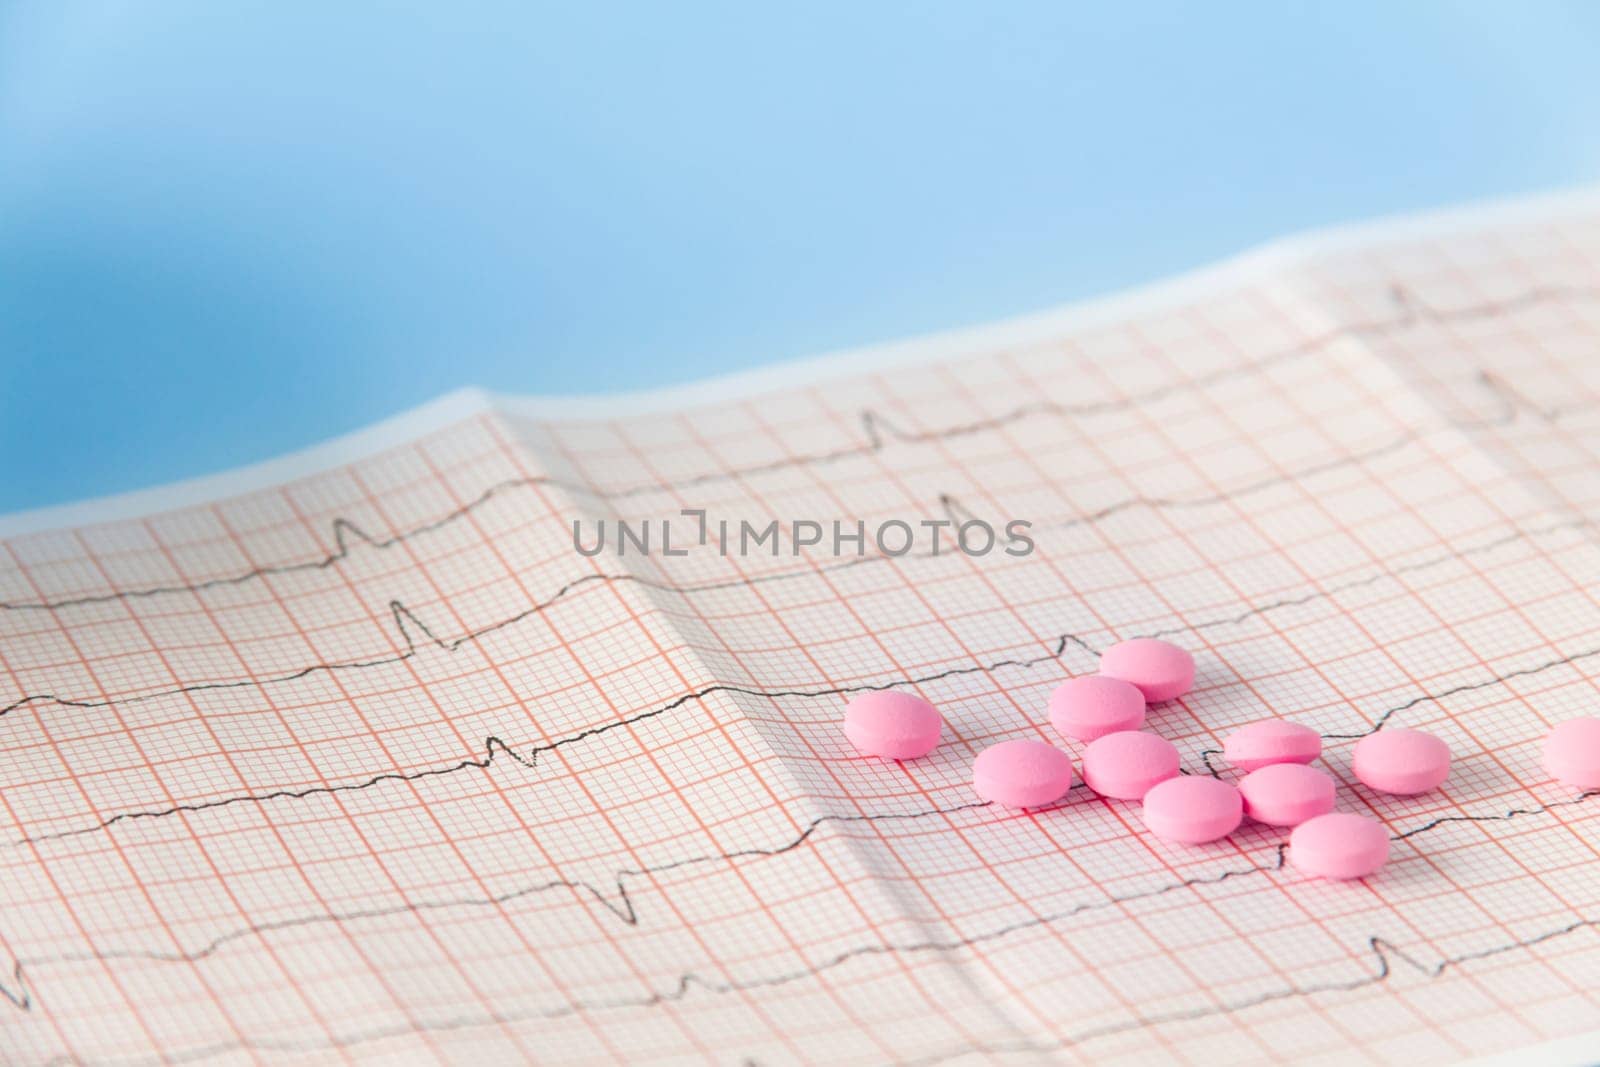 A large handful of pink pills lie on the electrocardiogram of the heart on a blue background. The concept of a healthy lifestyle and timely medical examination